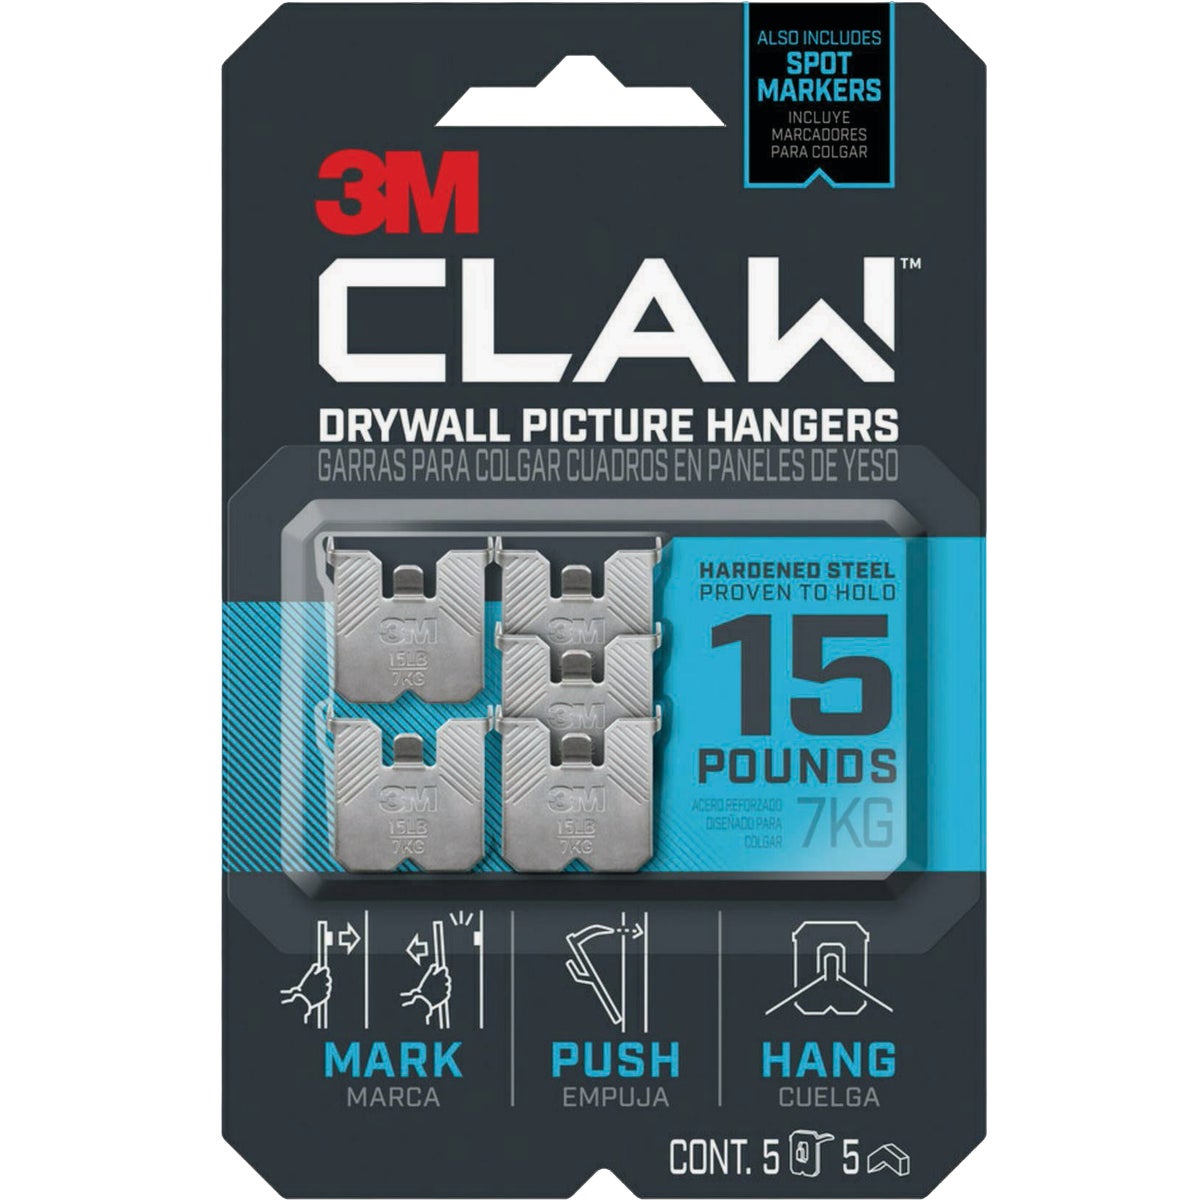 3M Claw 15 Lb. Drywall Picture Hanger with Temporary Spot Marker (5 Hangers, 5 Markers)